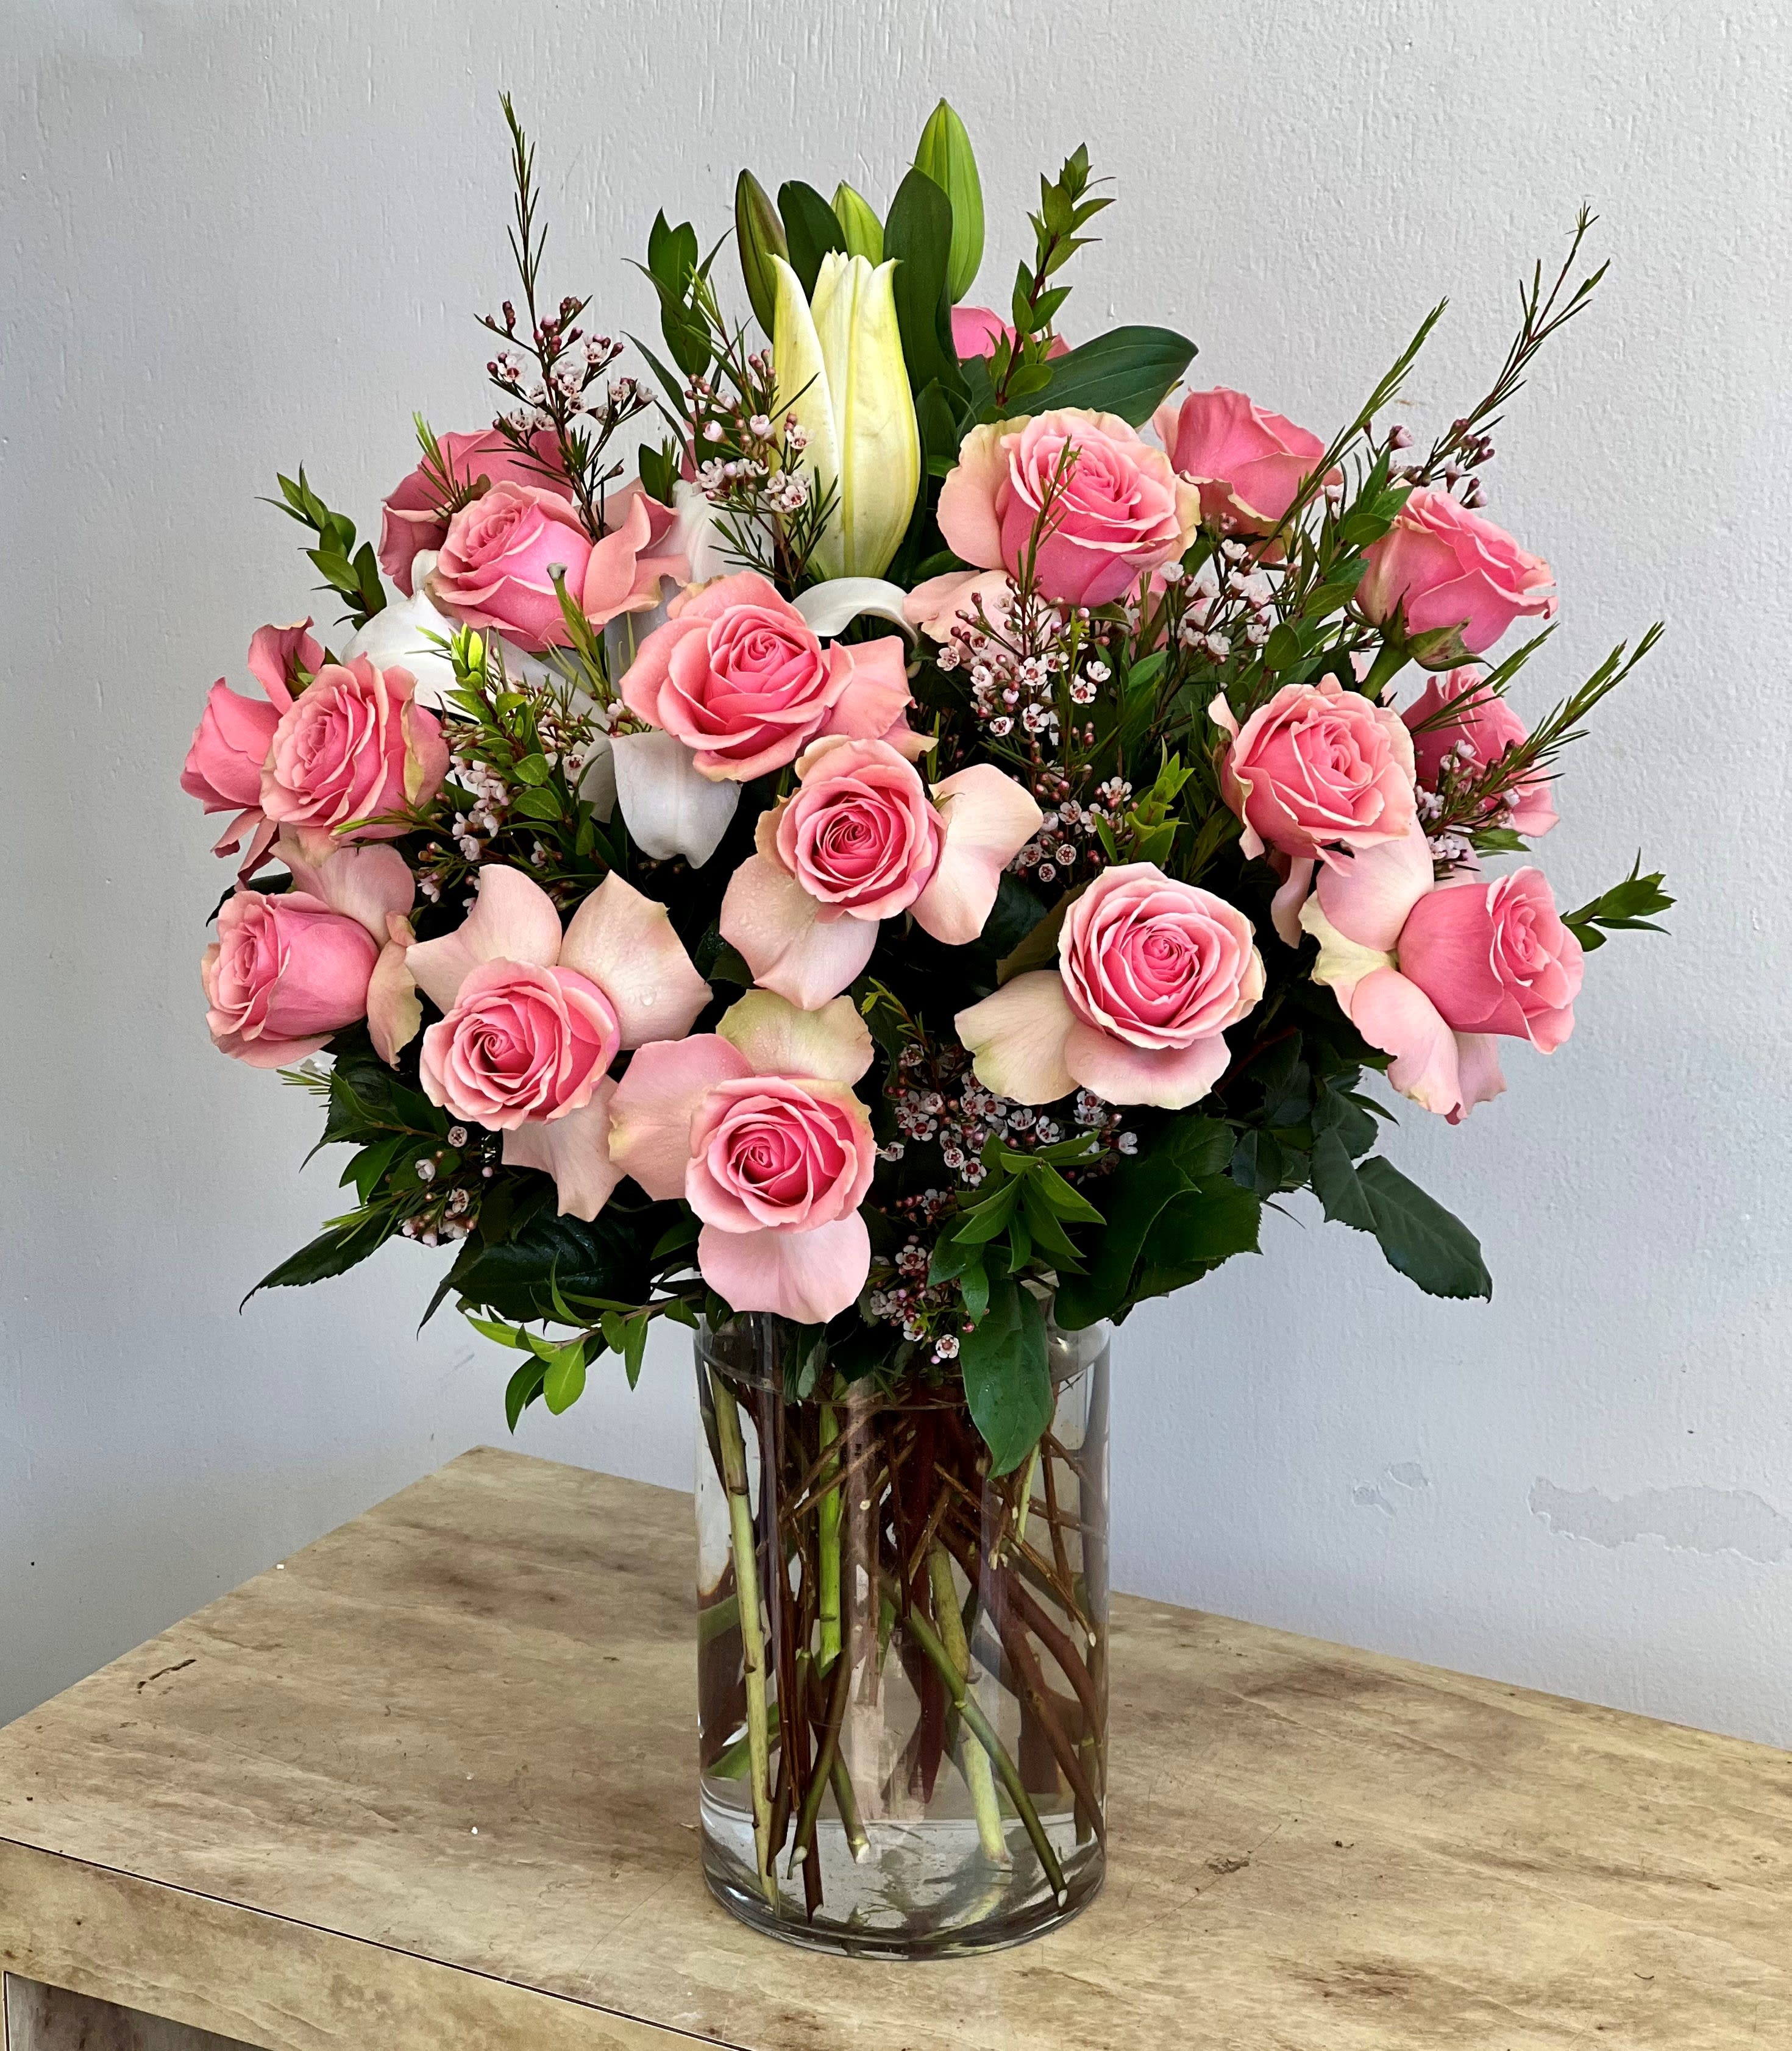 FOREVER 21 - The Perfect gift for a 21st Birthday!  21 Roses with a beautiful fragrant lily in the center.  With foliage and other accent flowers... 